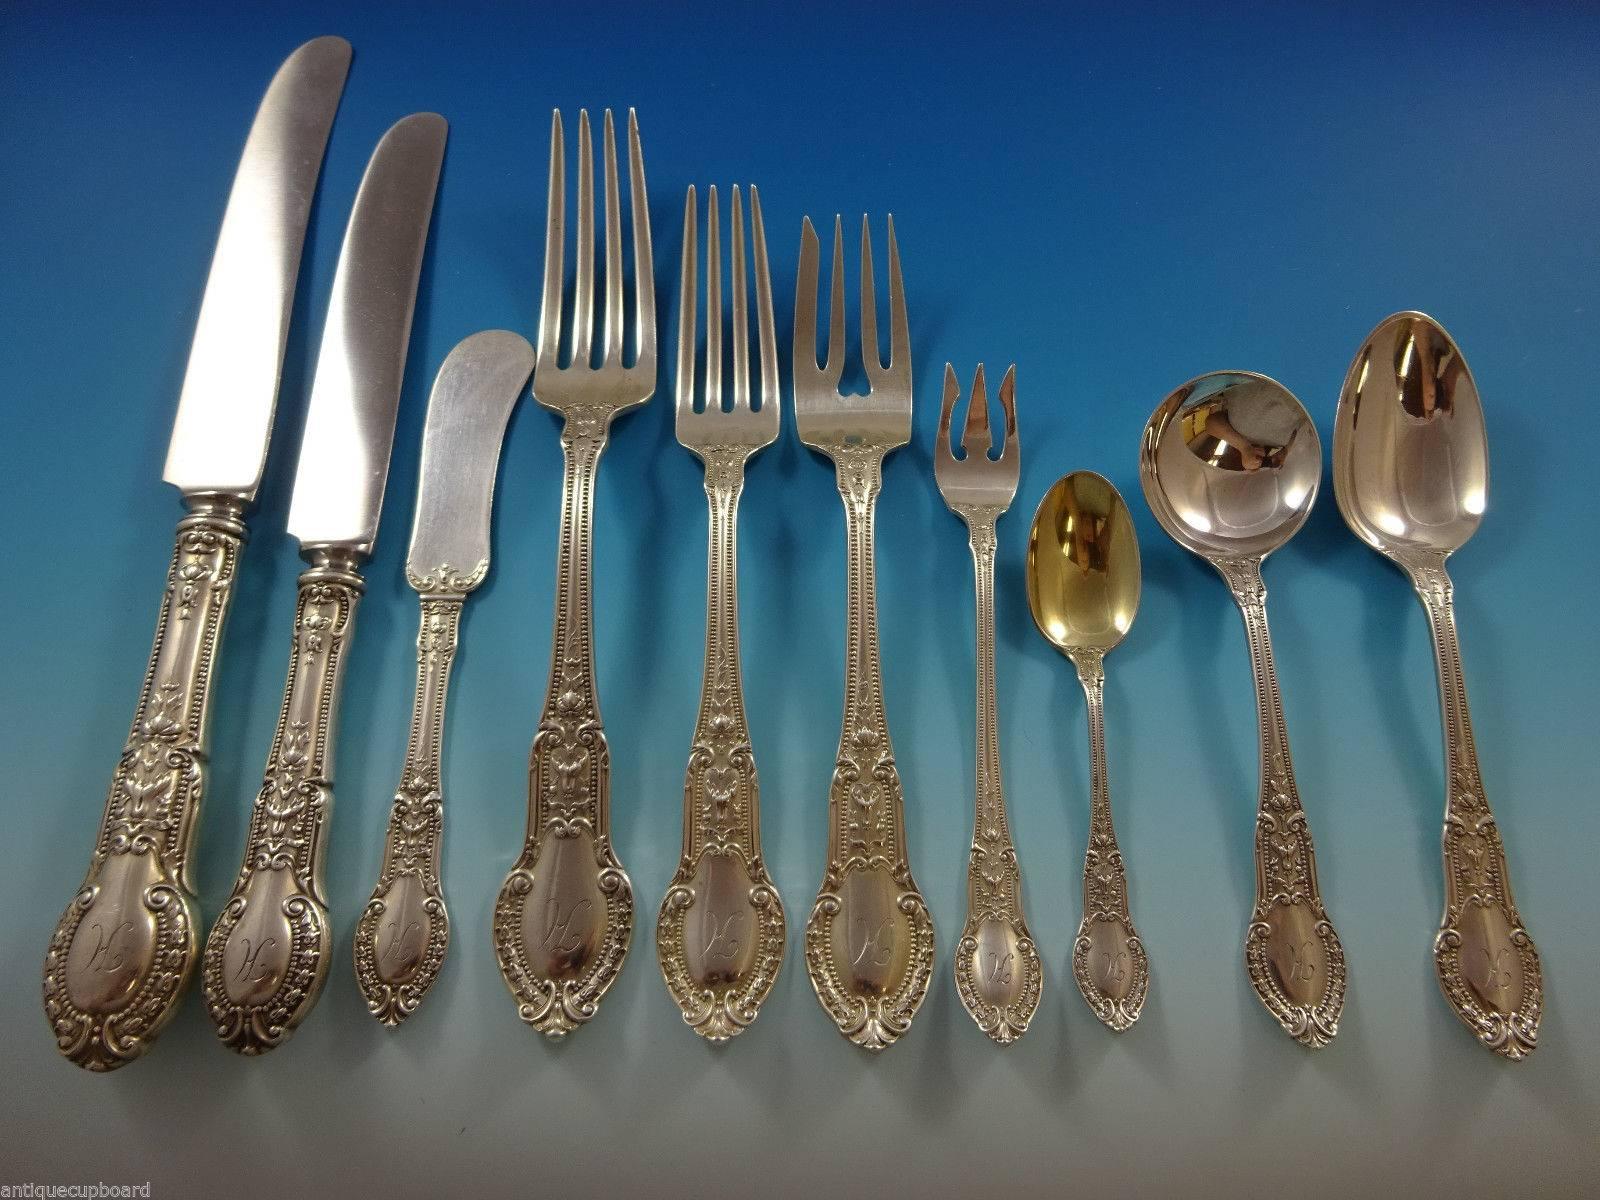 Tuileries by Gorham sterling silver flatware set of 168 pieces. This pattern was introduced by Gorham in the year 1906. This set includes:

12 dinner size knives, 9 5/8